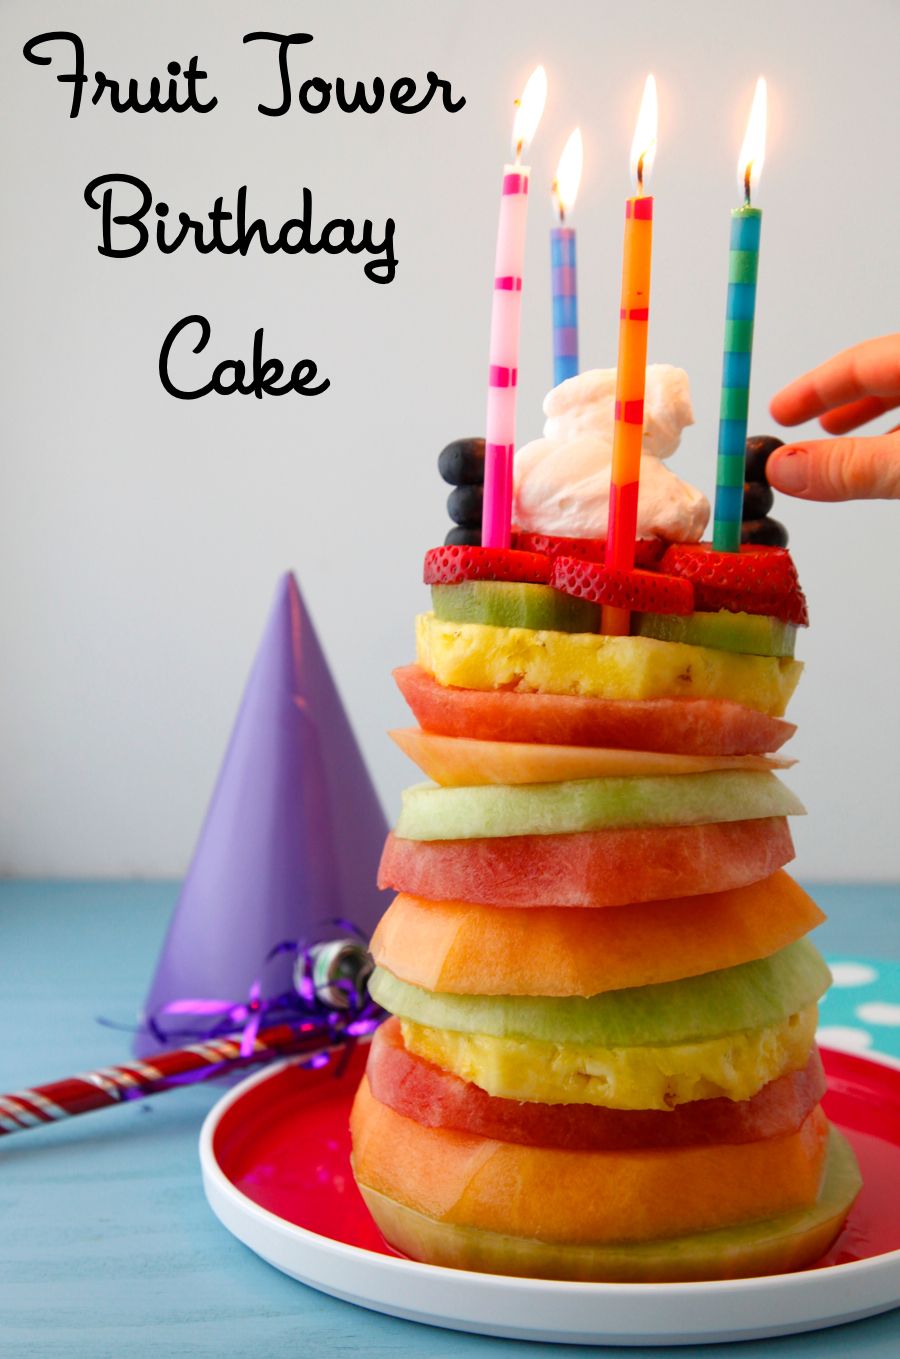 Healthy Birthday Cakes To Buy